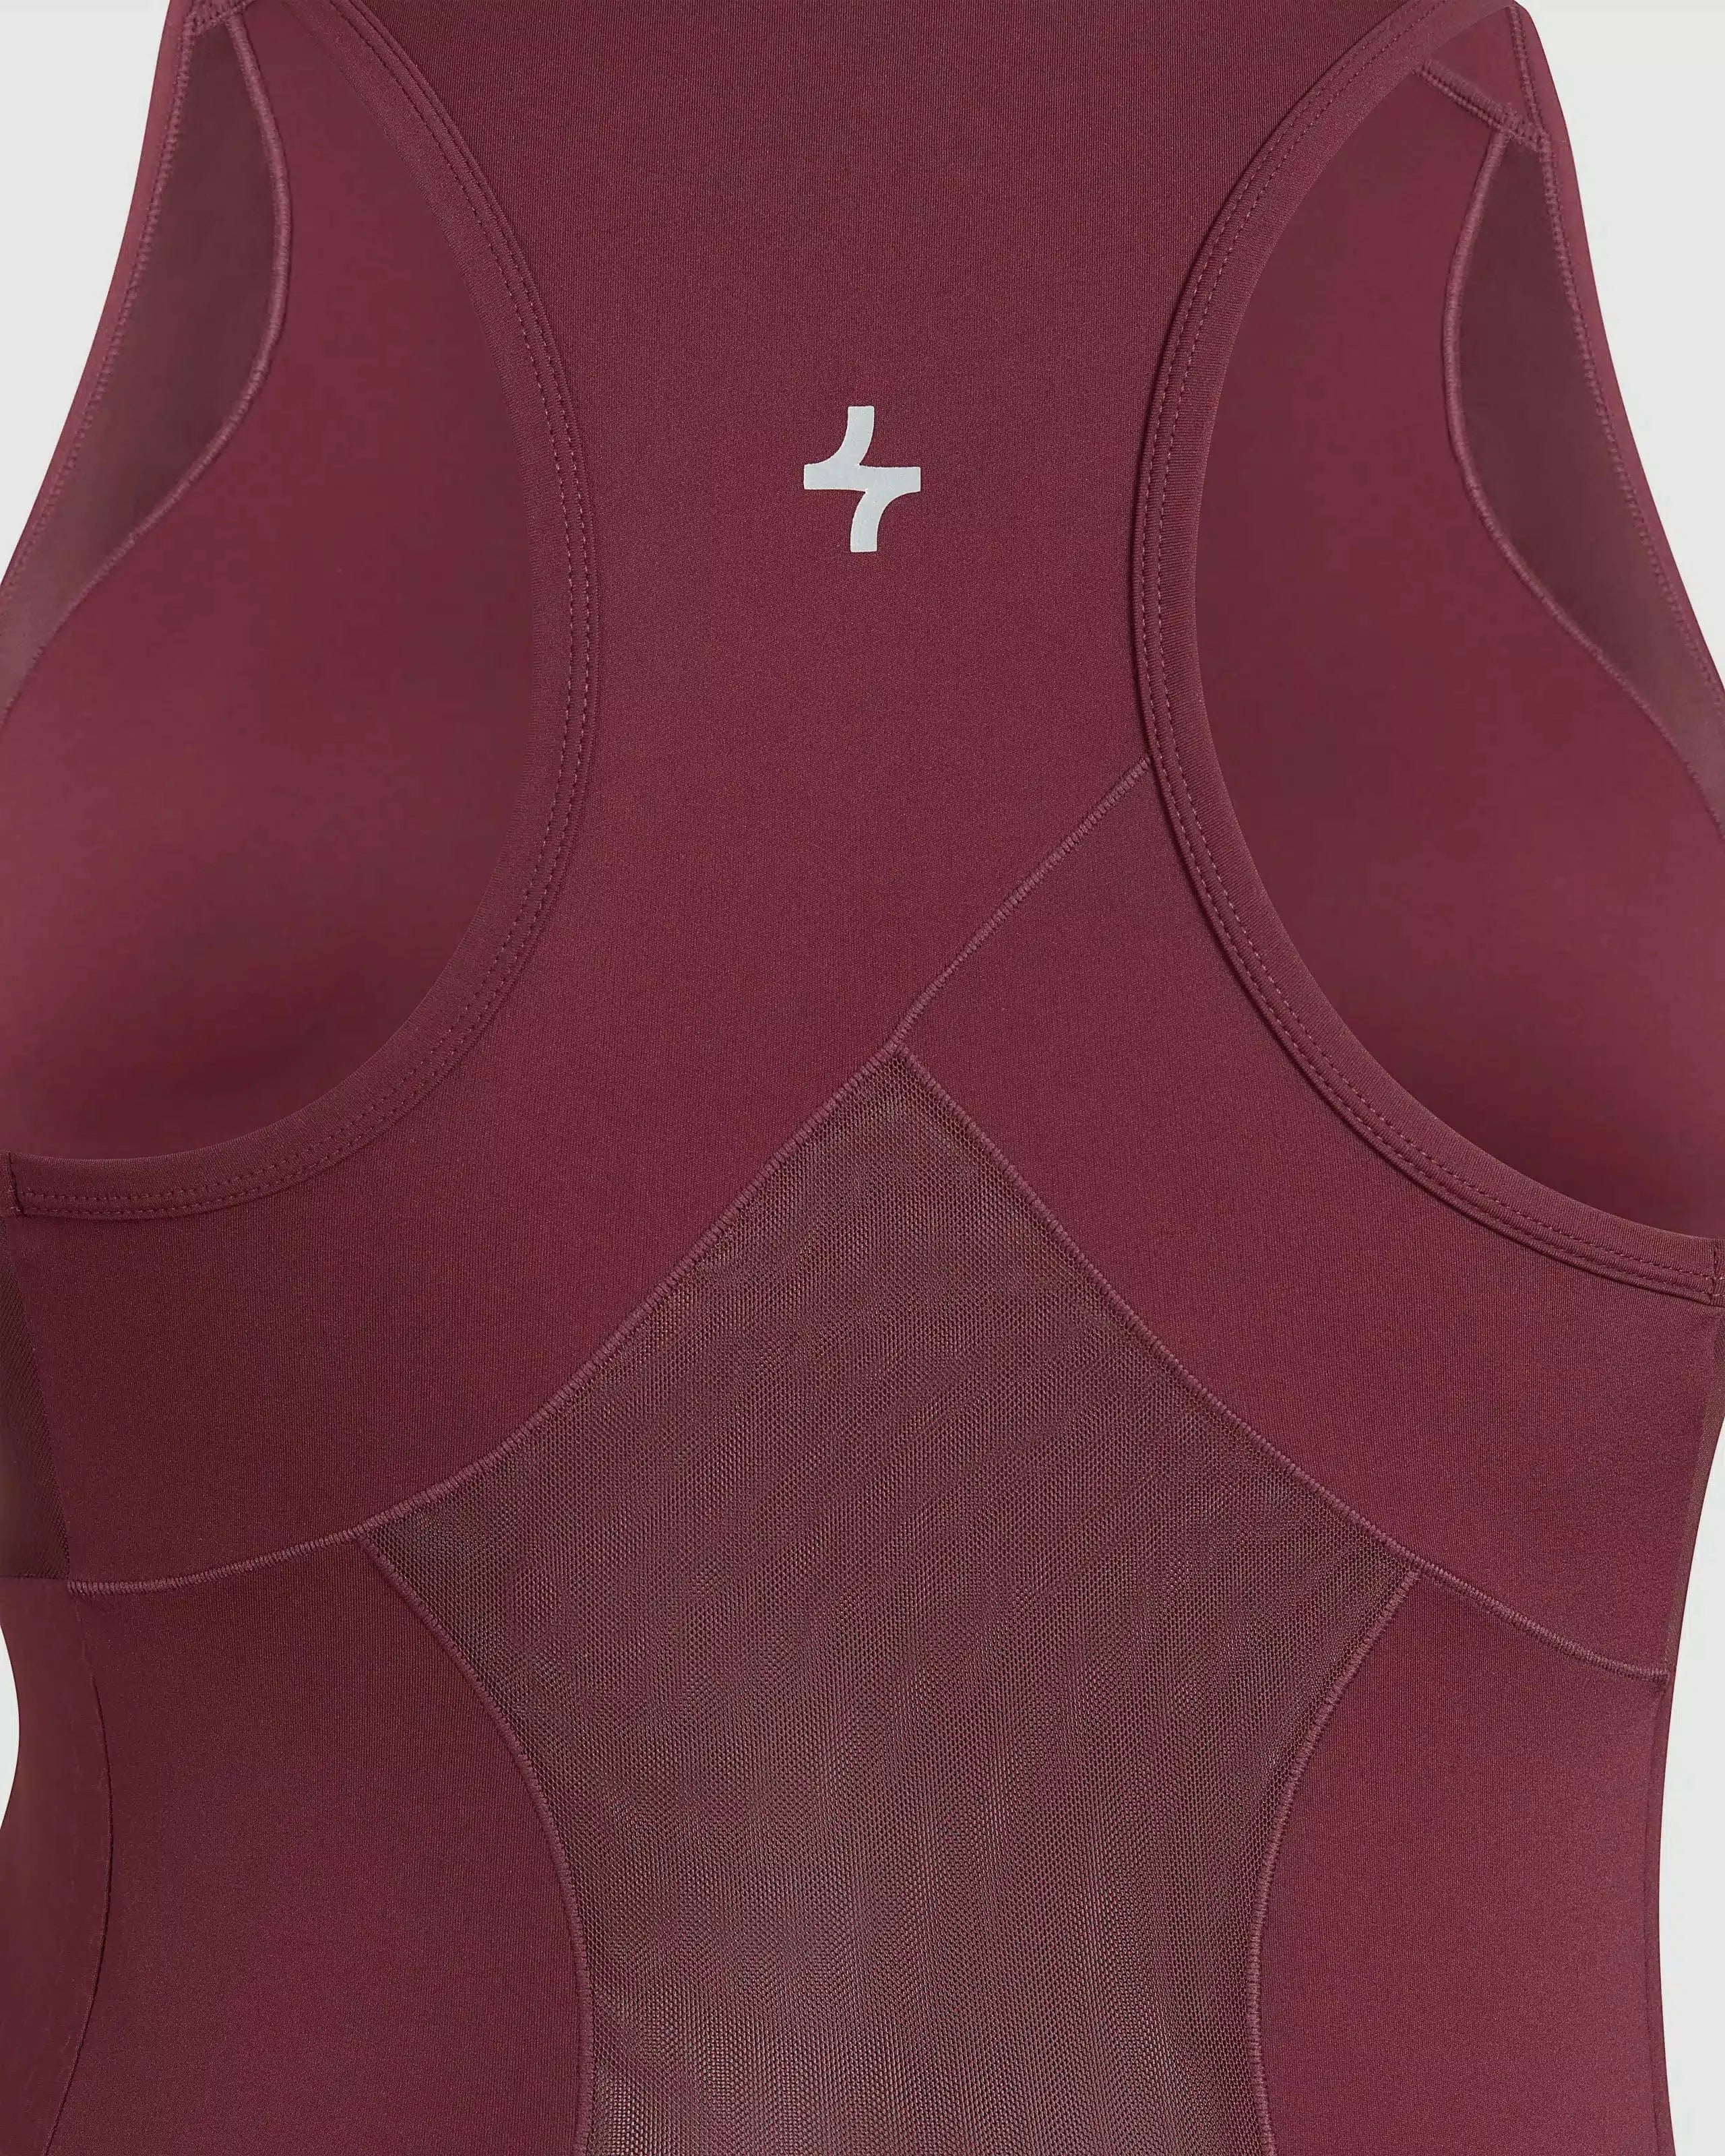 Close view of Maroon colored BADA TANK TOP with qynda logo, high neckline and mesh back and sides isolated on a white background.